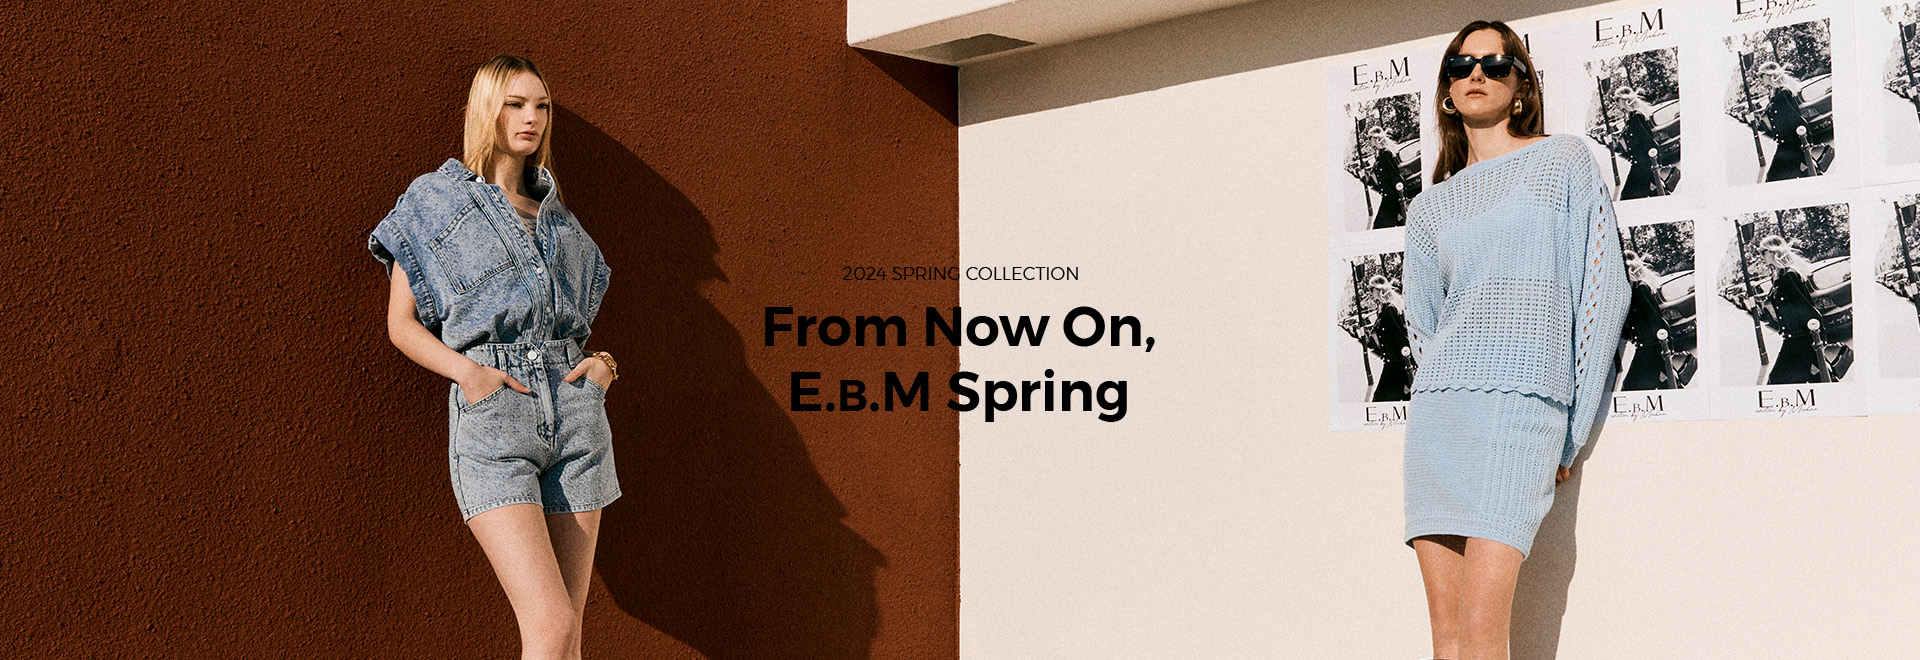 From Now On, E.B.M Spring